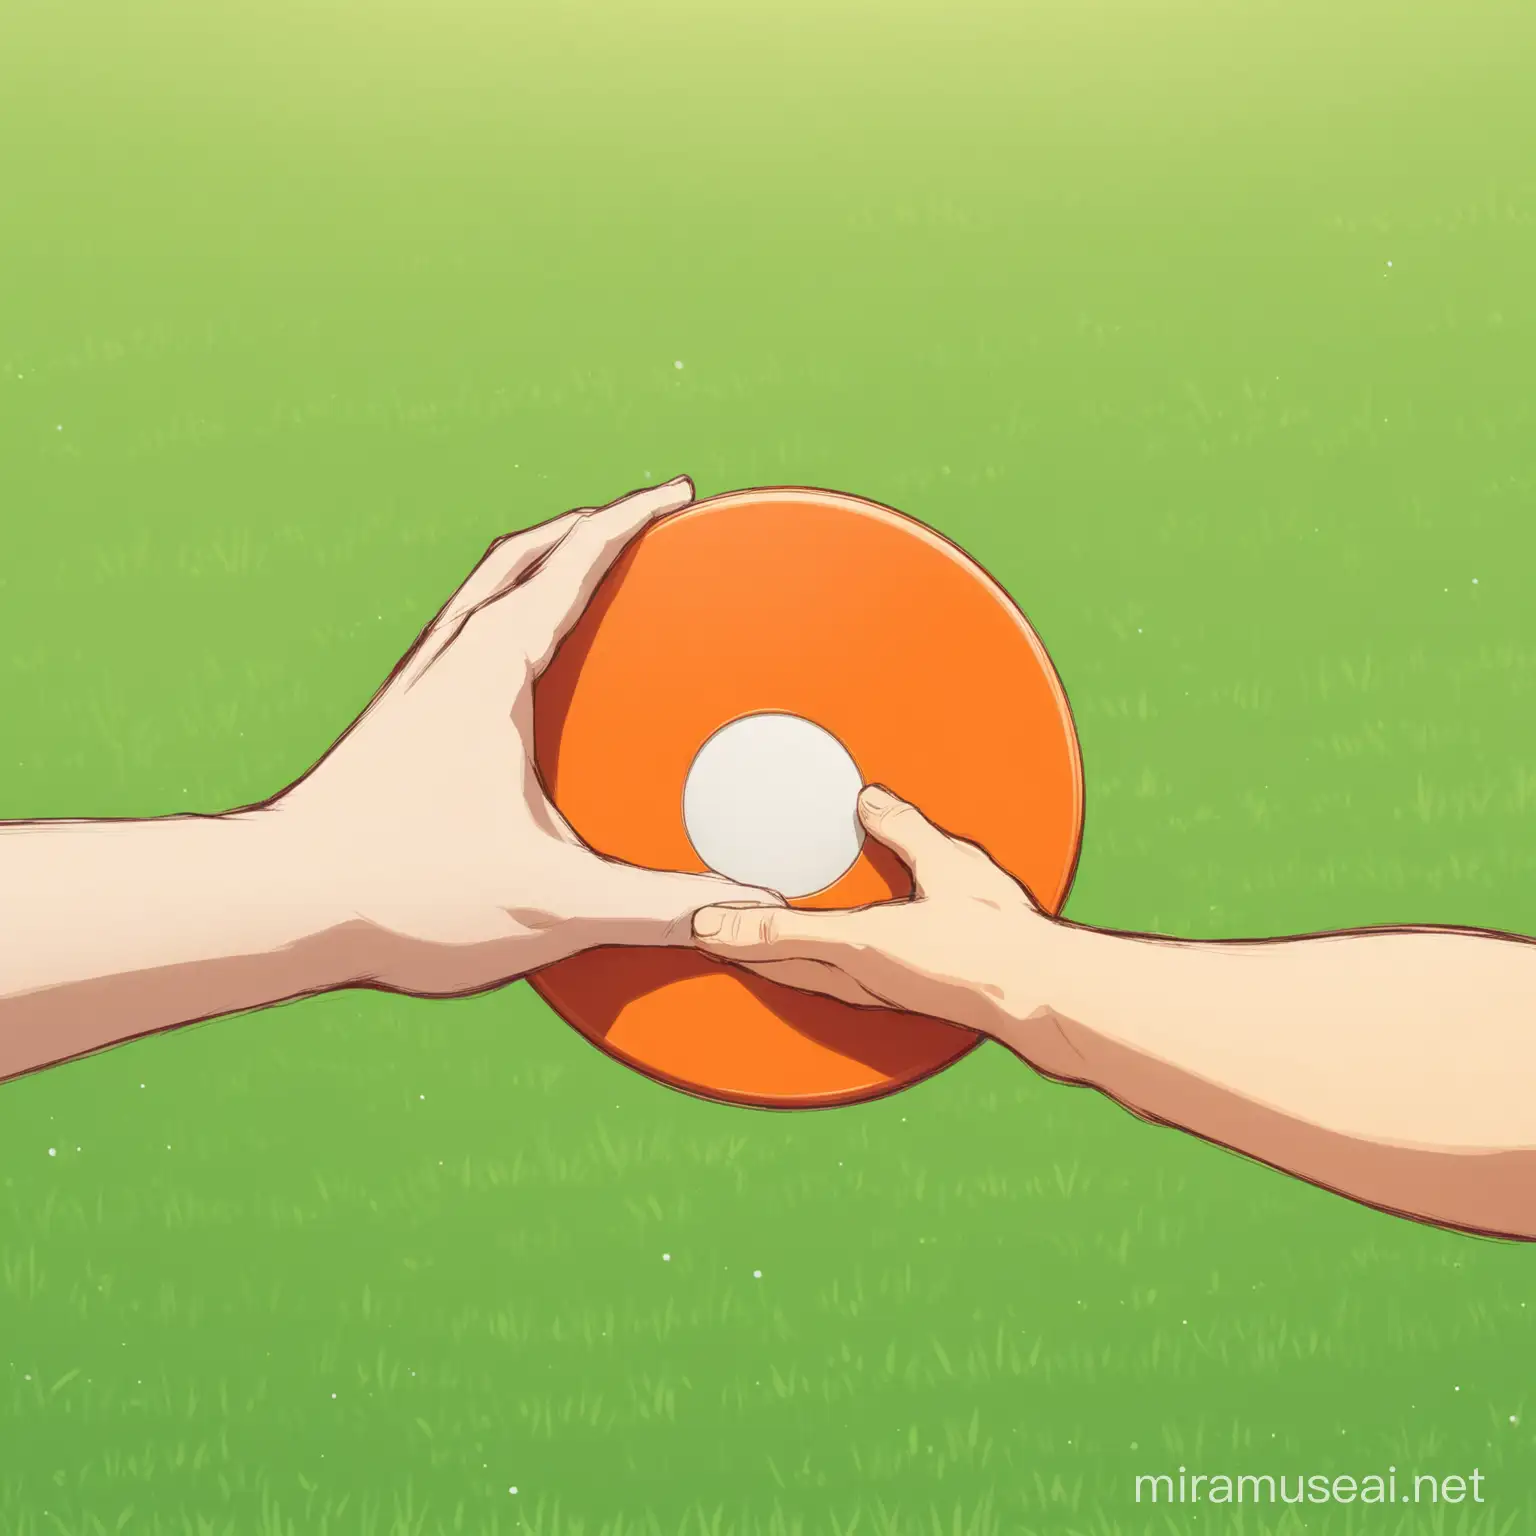 A hand is giving a frisbee to another hand who is reaching for the disc